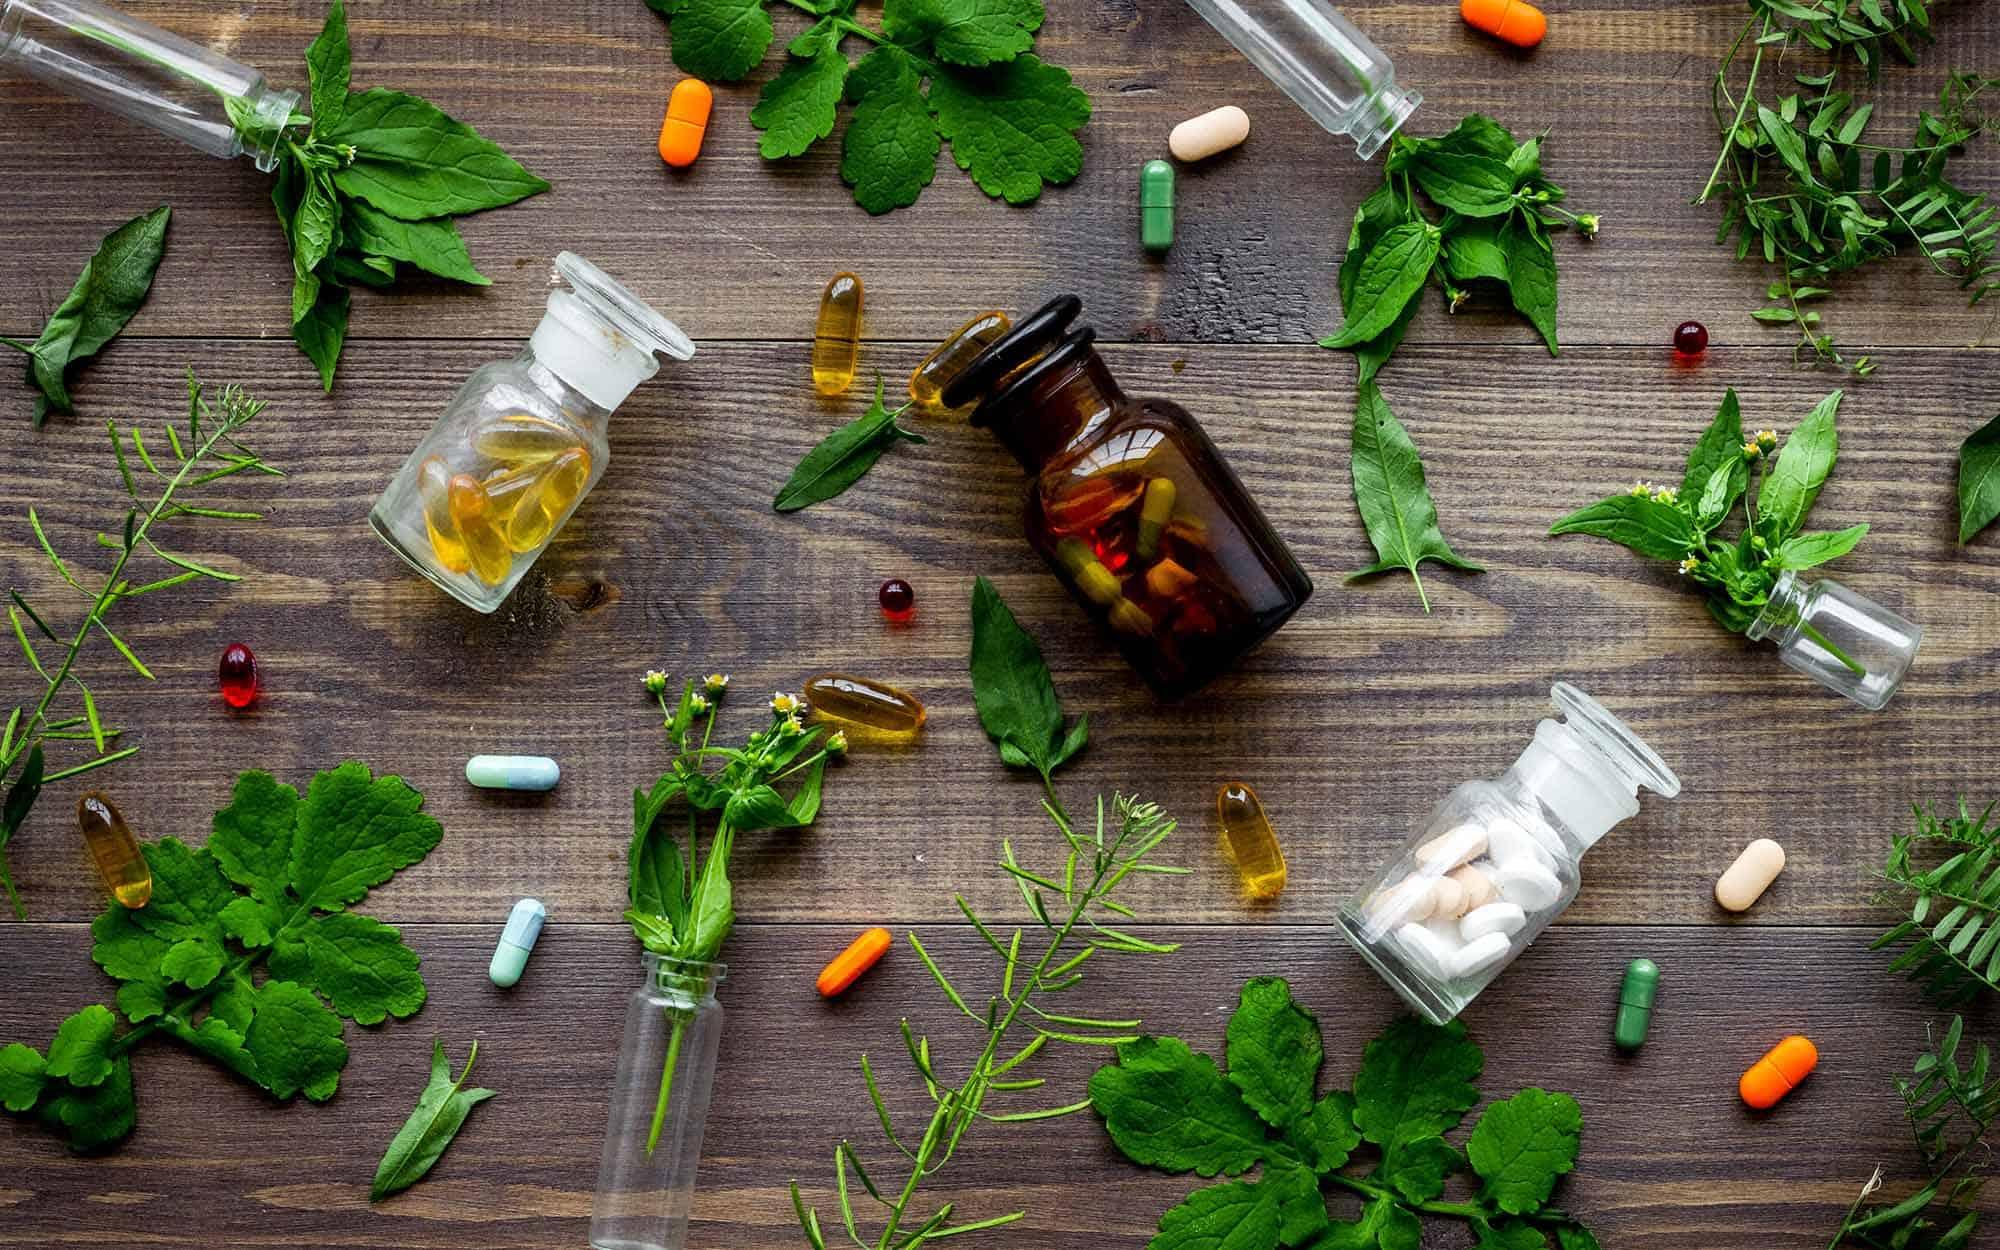 How can medicinal herbs be utilized to create equitable and effective alternatives to current pharmaceutical drugs that are used to treat anxiety and depression?